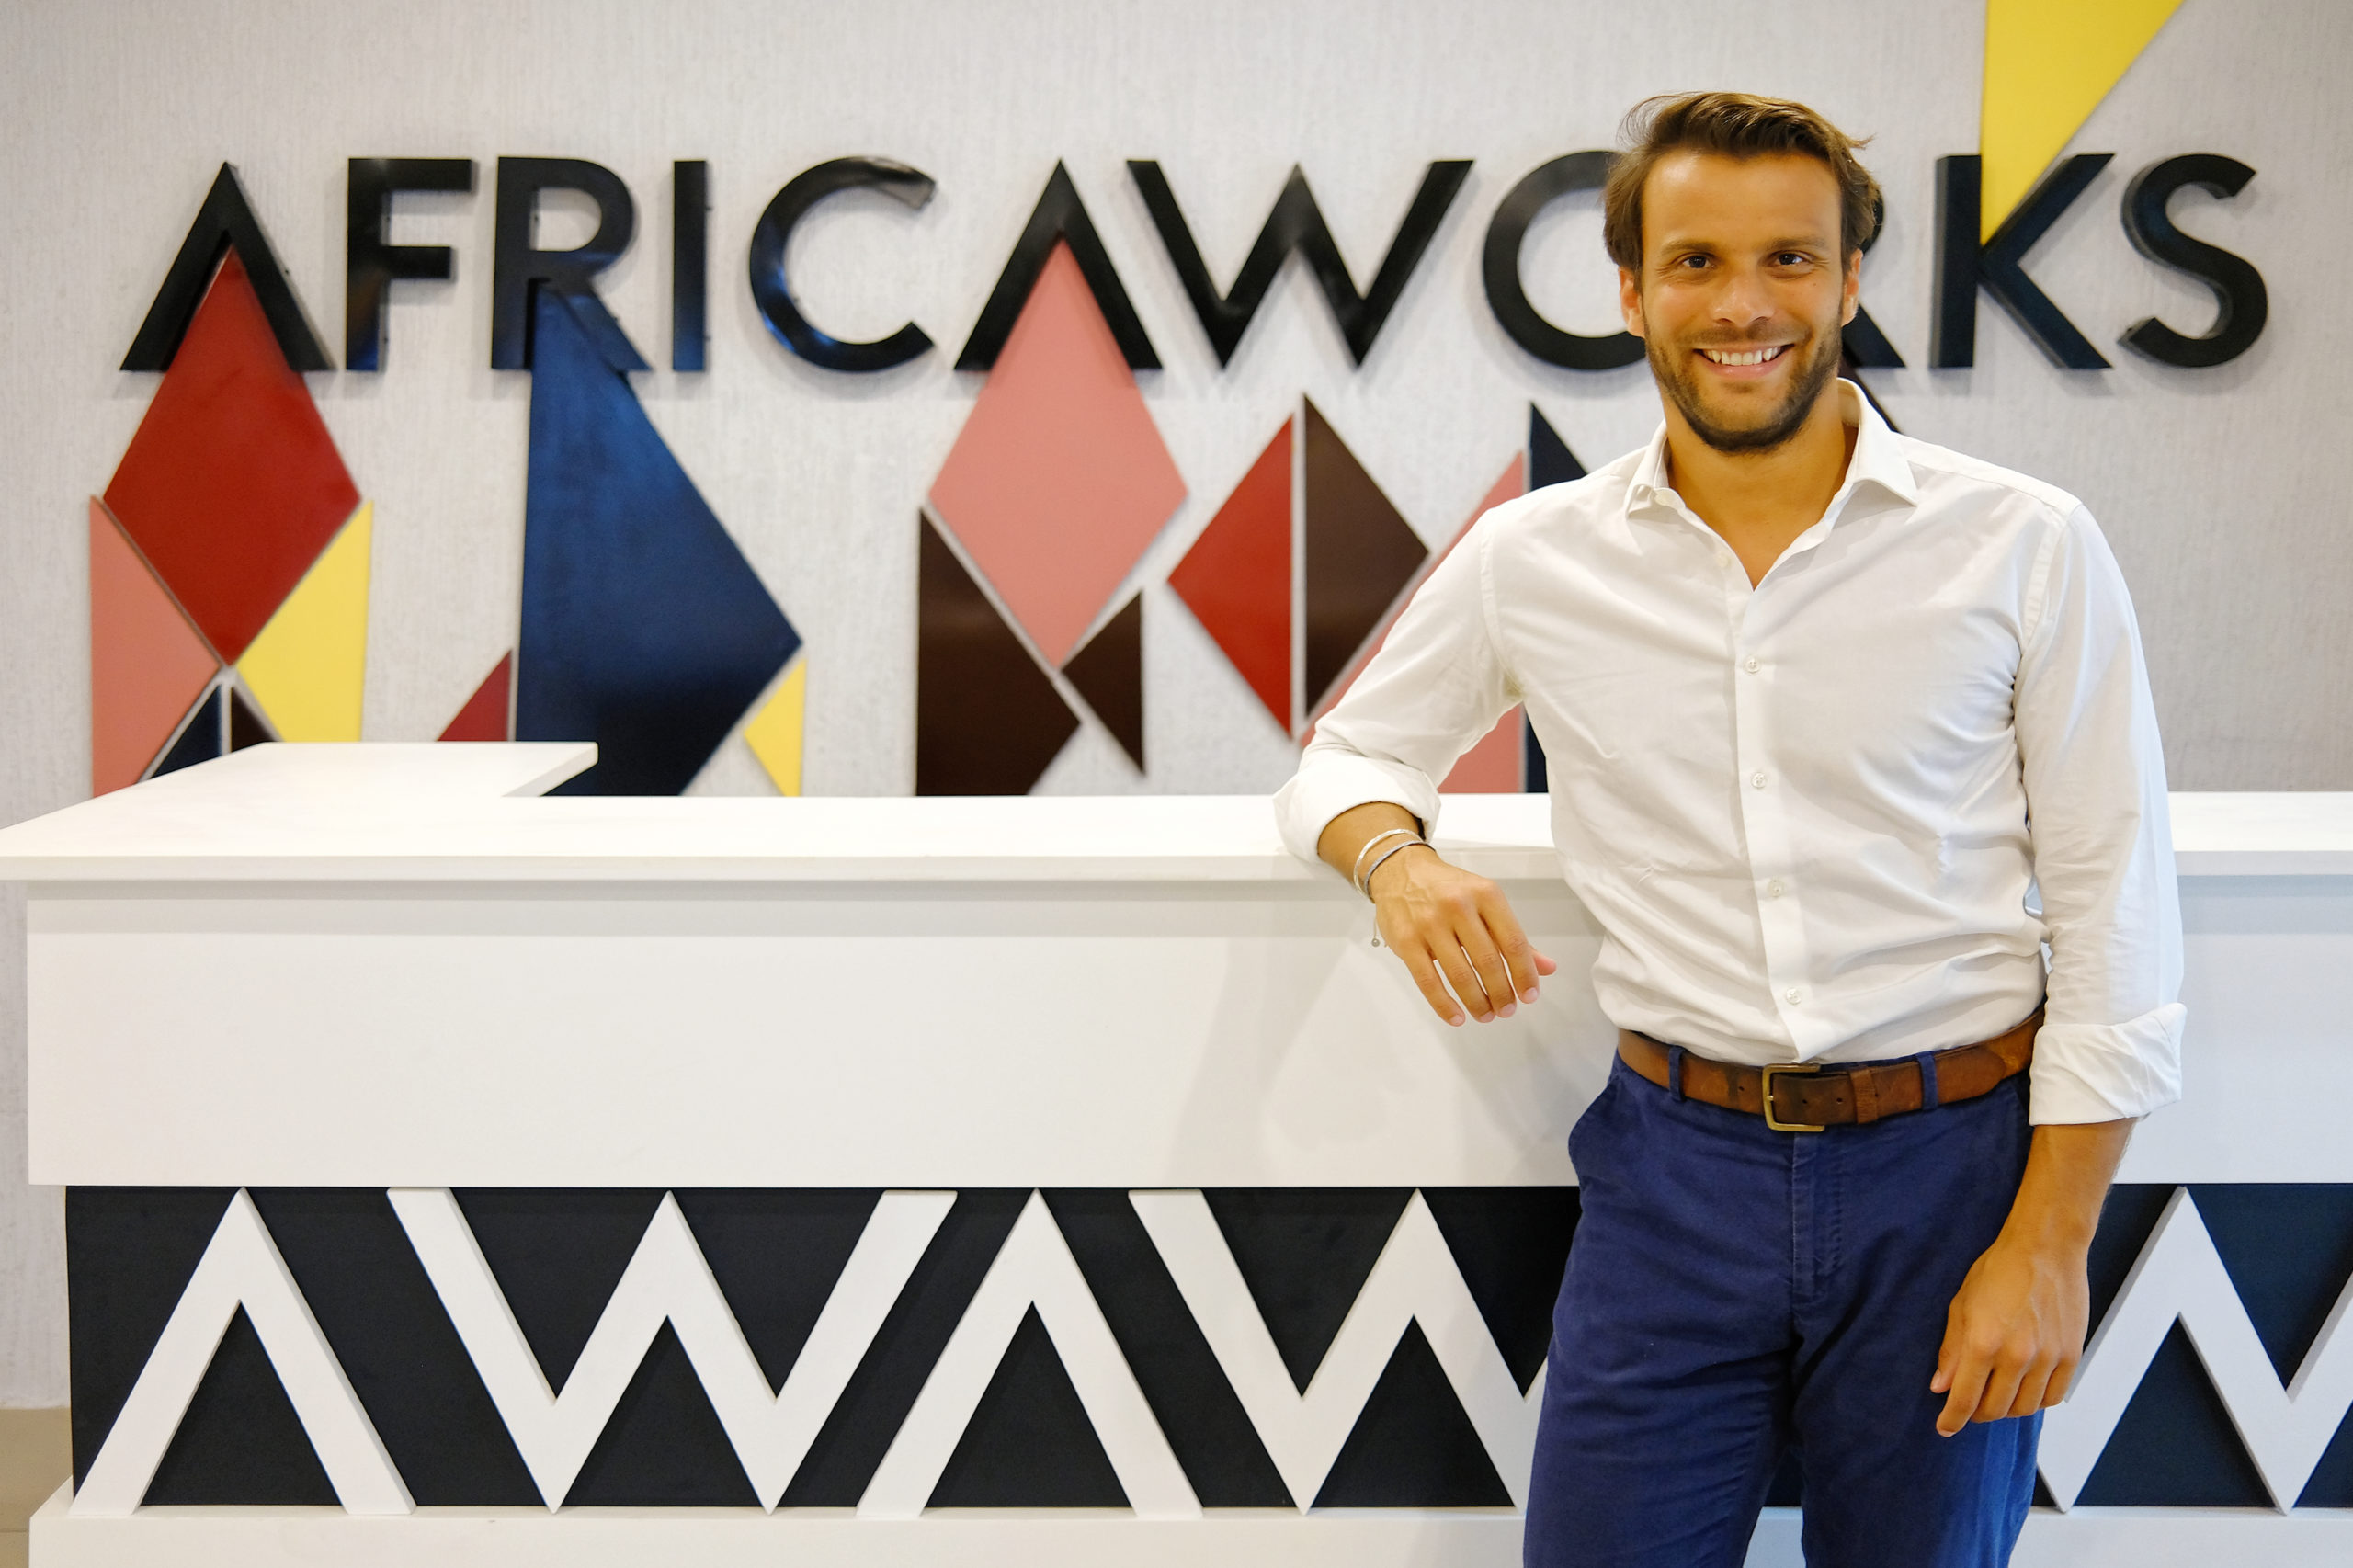 AfricaWorks' ambition transcends being a coworking space